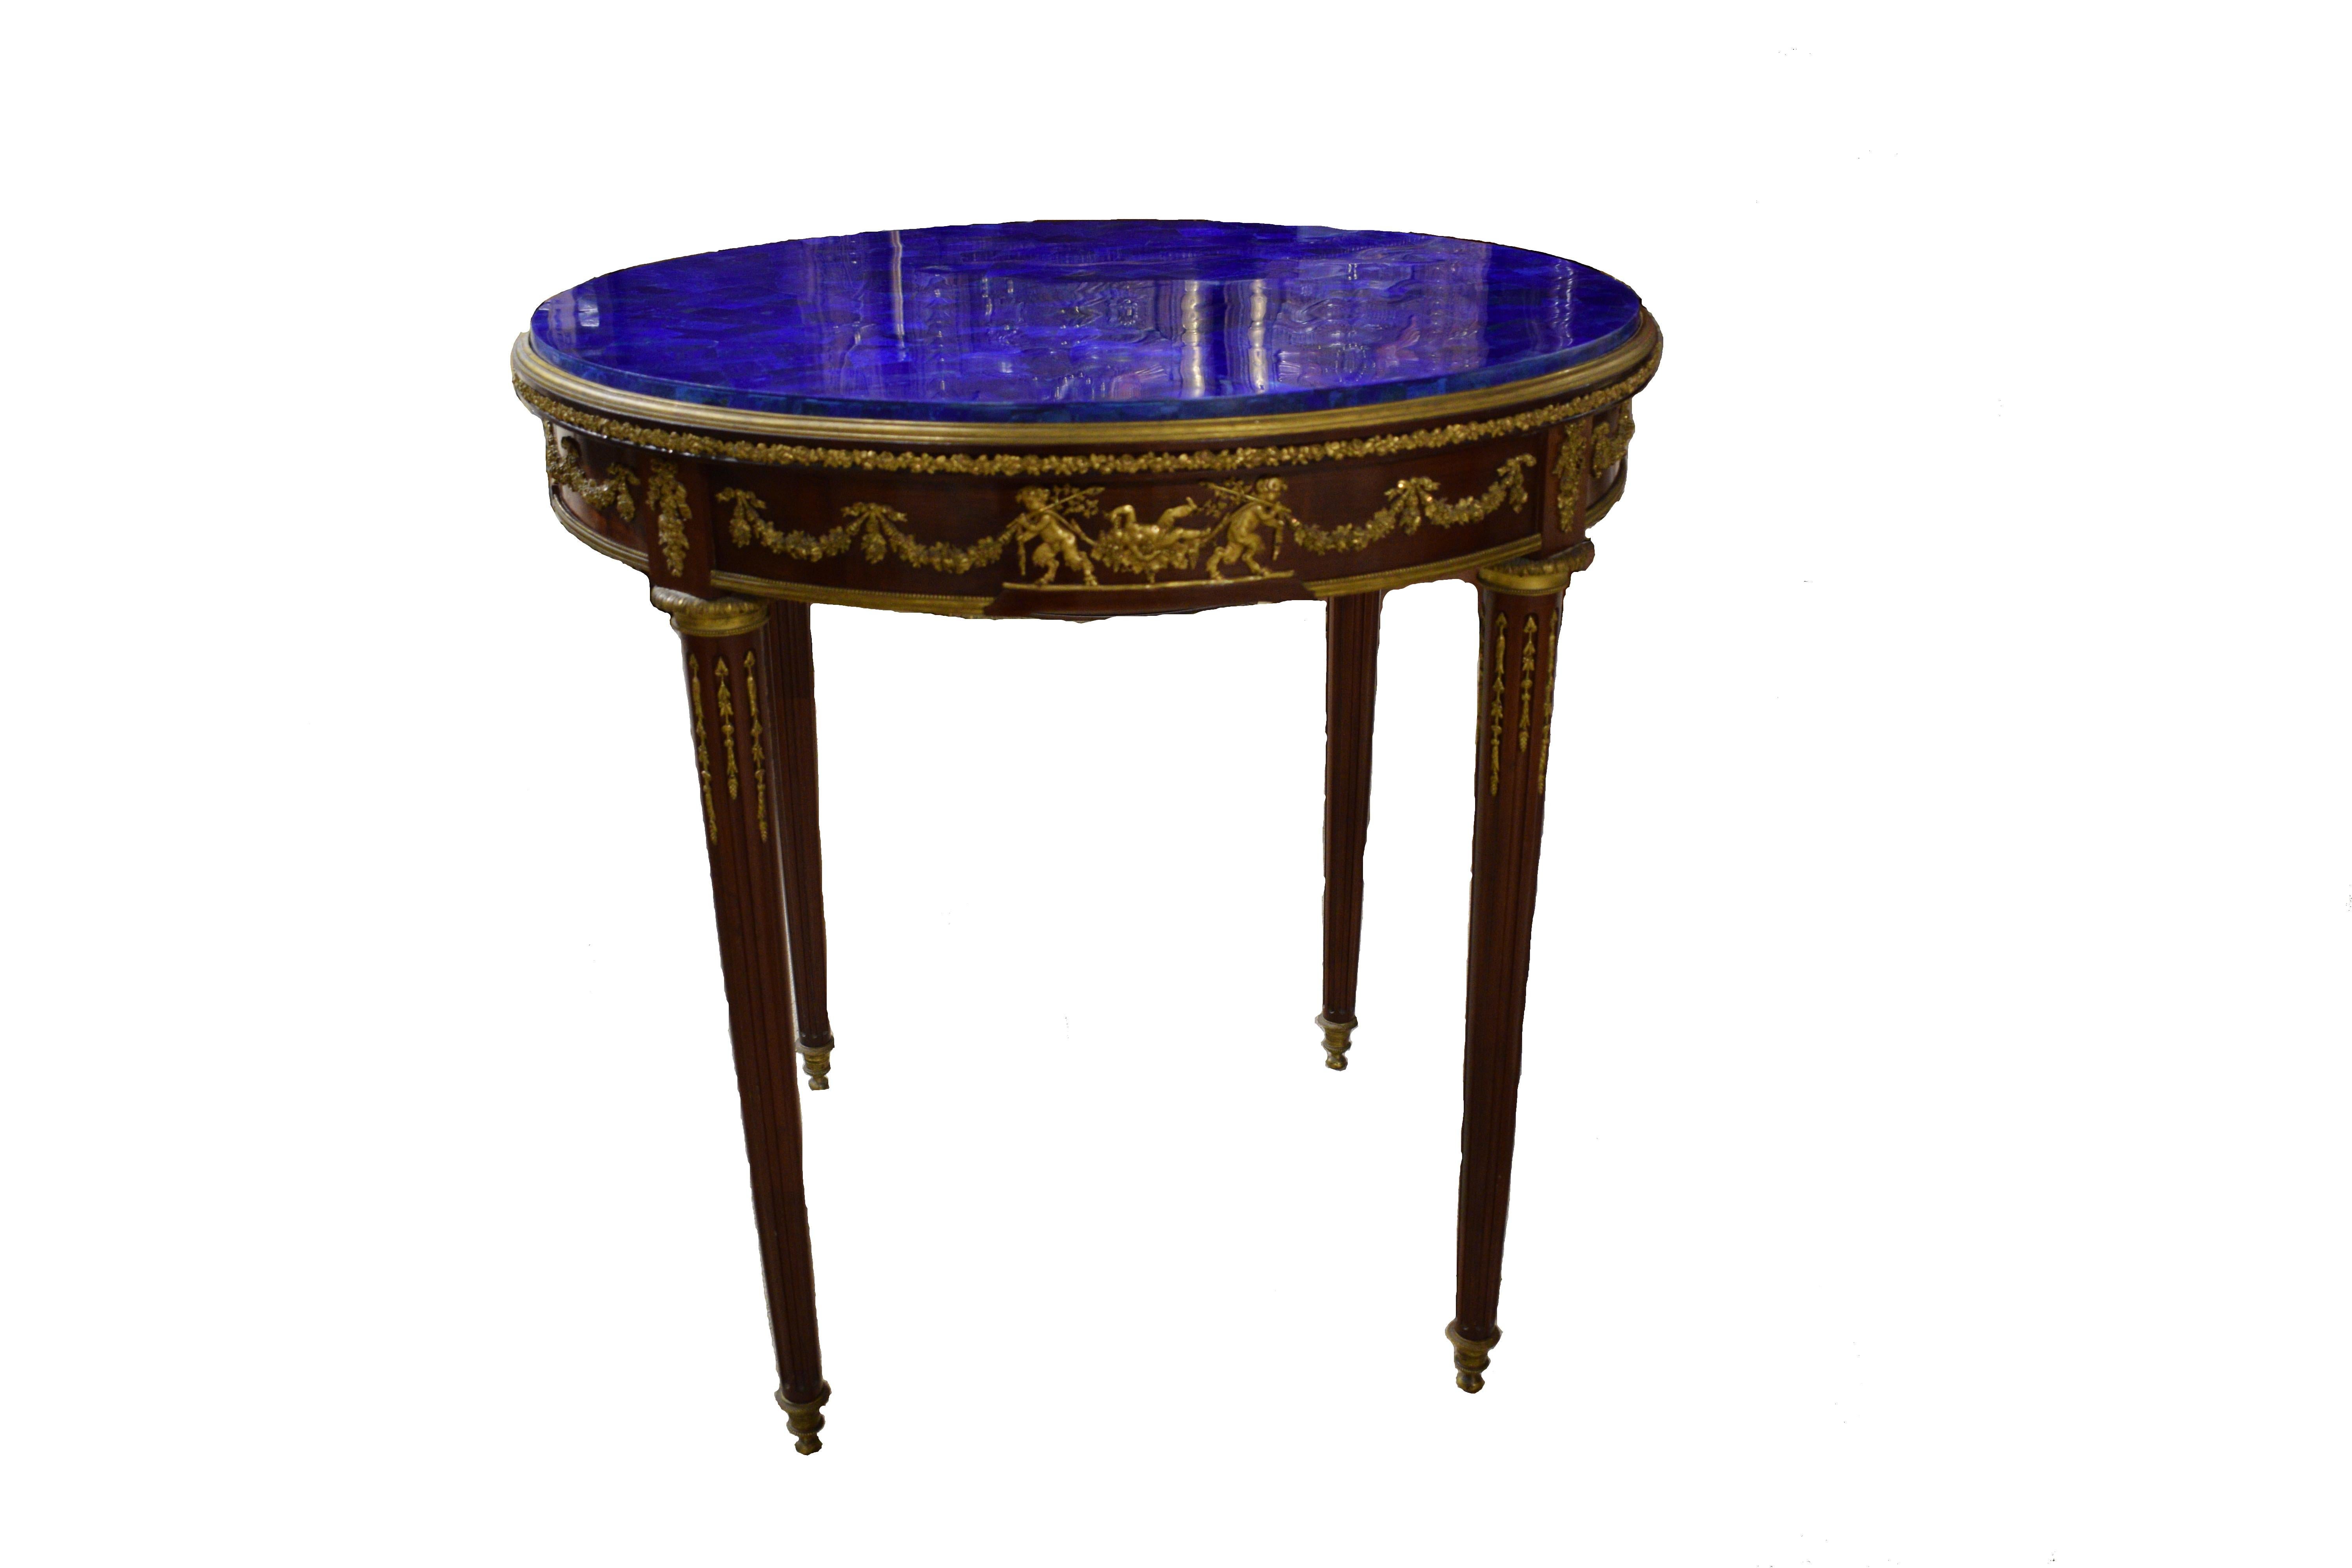 A fine mahogany gilt bronze mounted center table featuring a Lapis Lazuli Top. The bronze mounts, of extraordinary quality, depict frolicking children and baby satire's carrying decorative garlands. Raised on four bronze mounted reeded